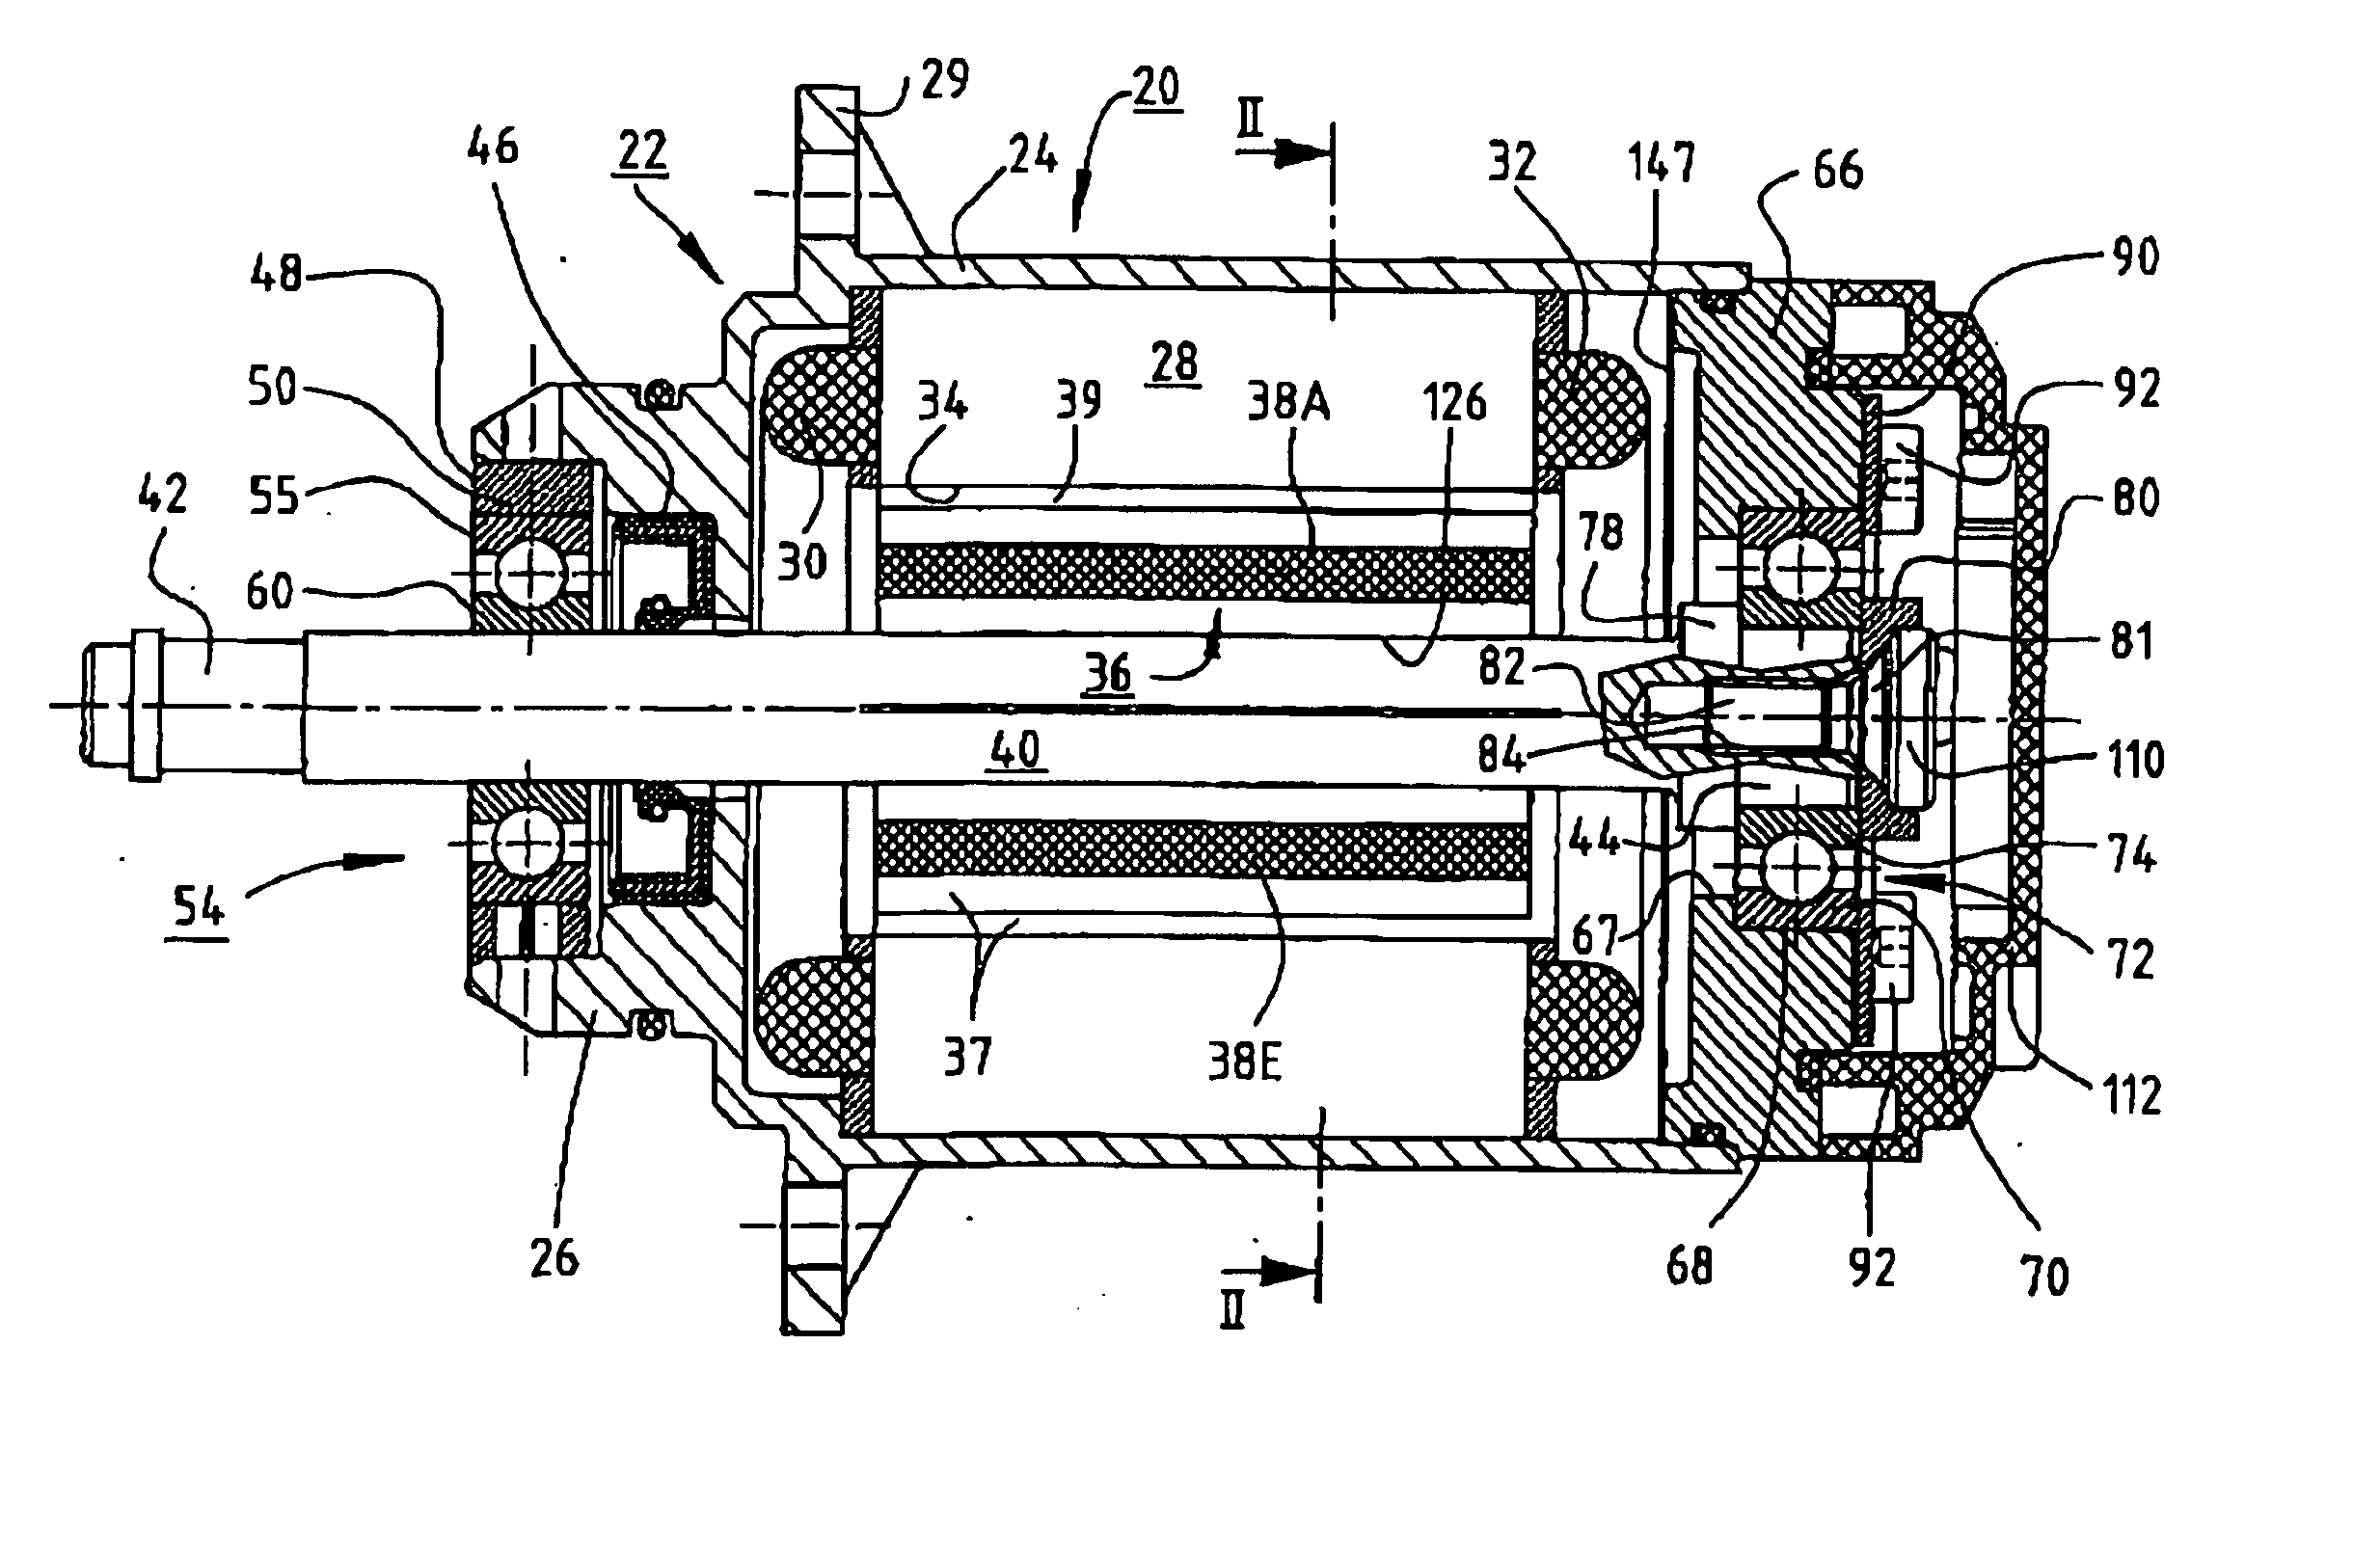 Electric motor with poles shaped to minimize cogging torque